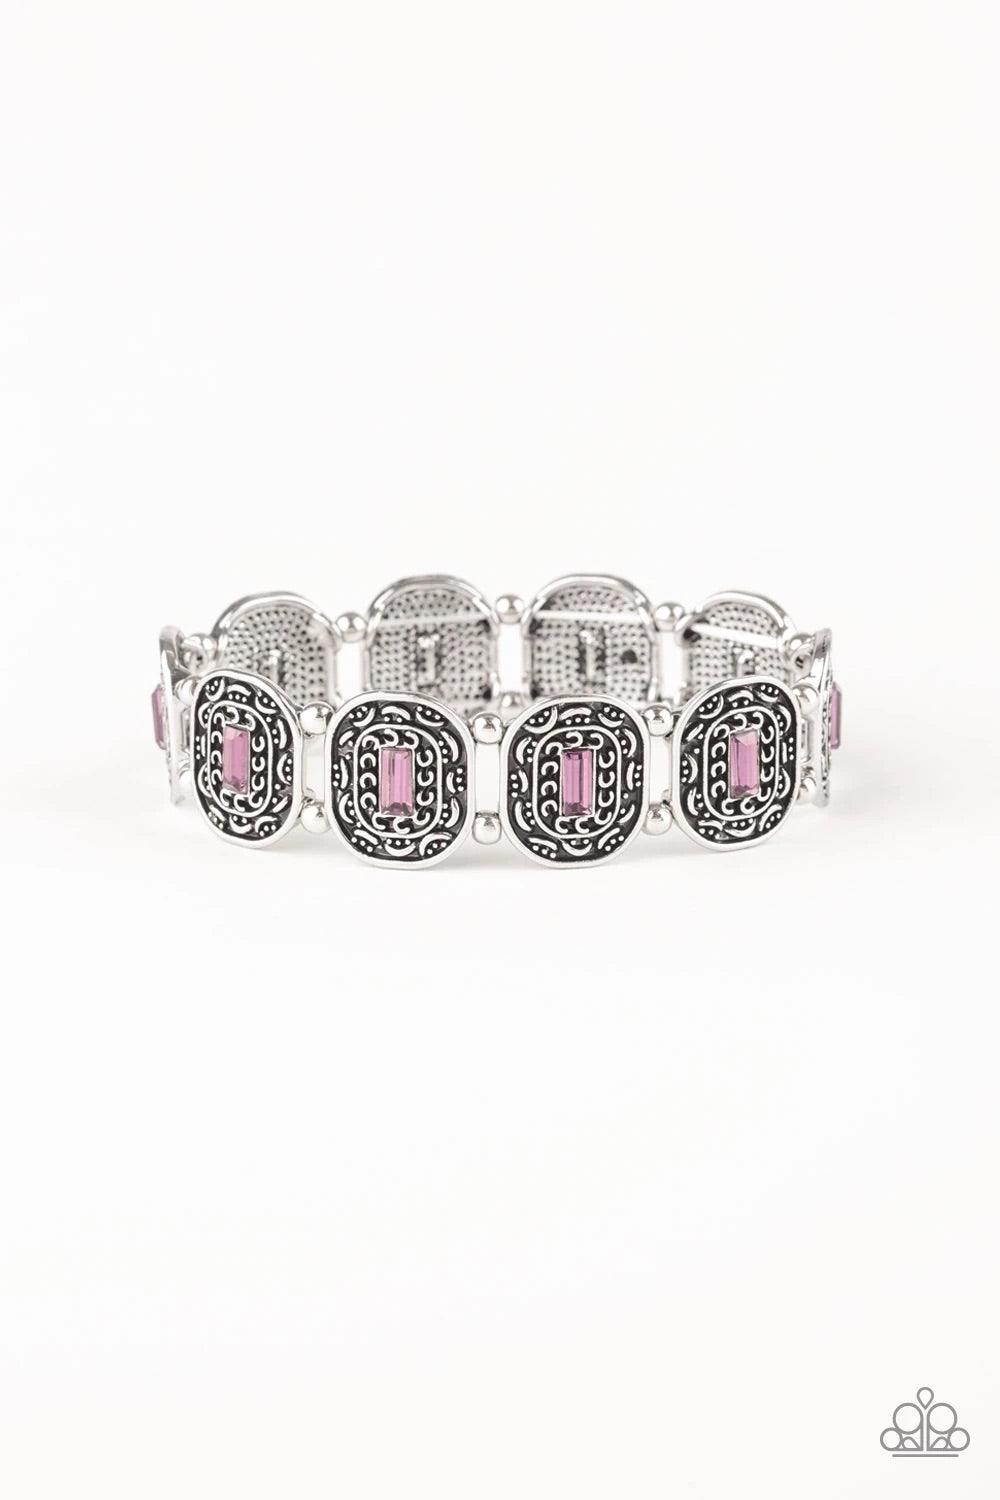 Paparazzi Accessories Hidden Fortune - Purple Featuring purple emerald-cut rhinestone centers, ornate silver frames are threaded along stretchy bands around the wrist for a refined fashion. Jewelry